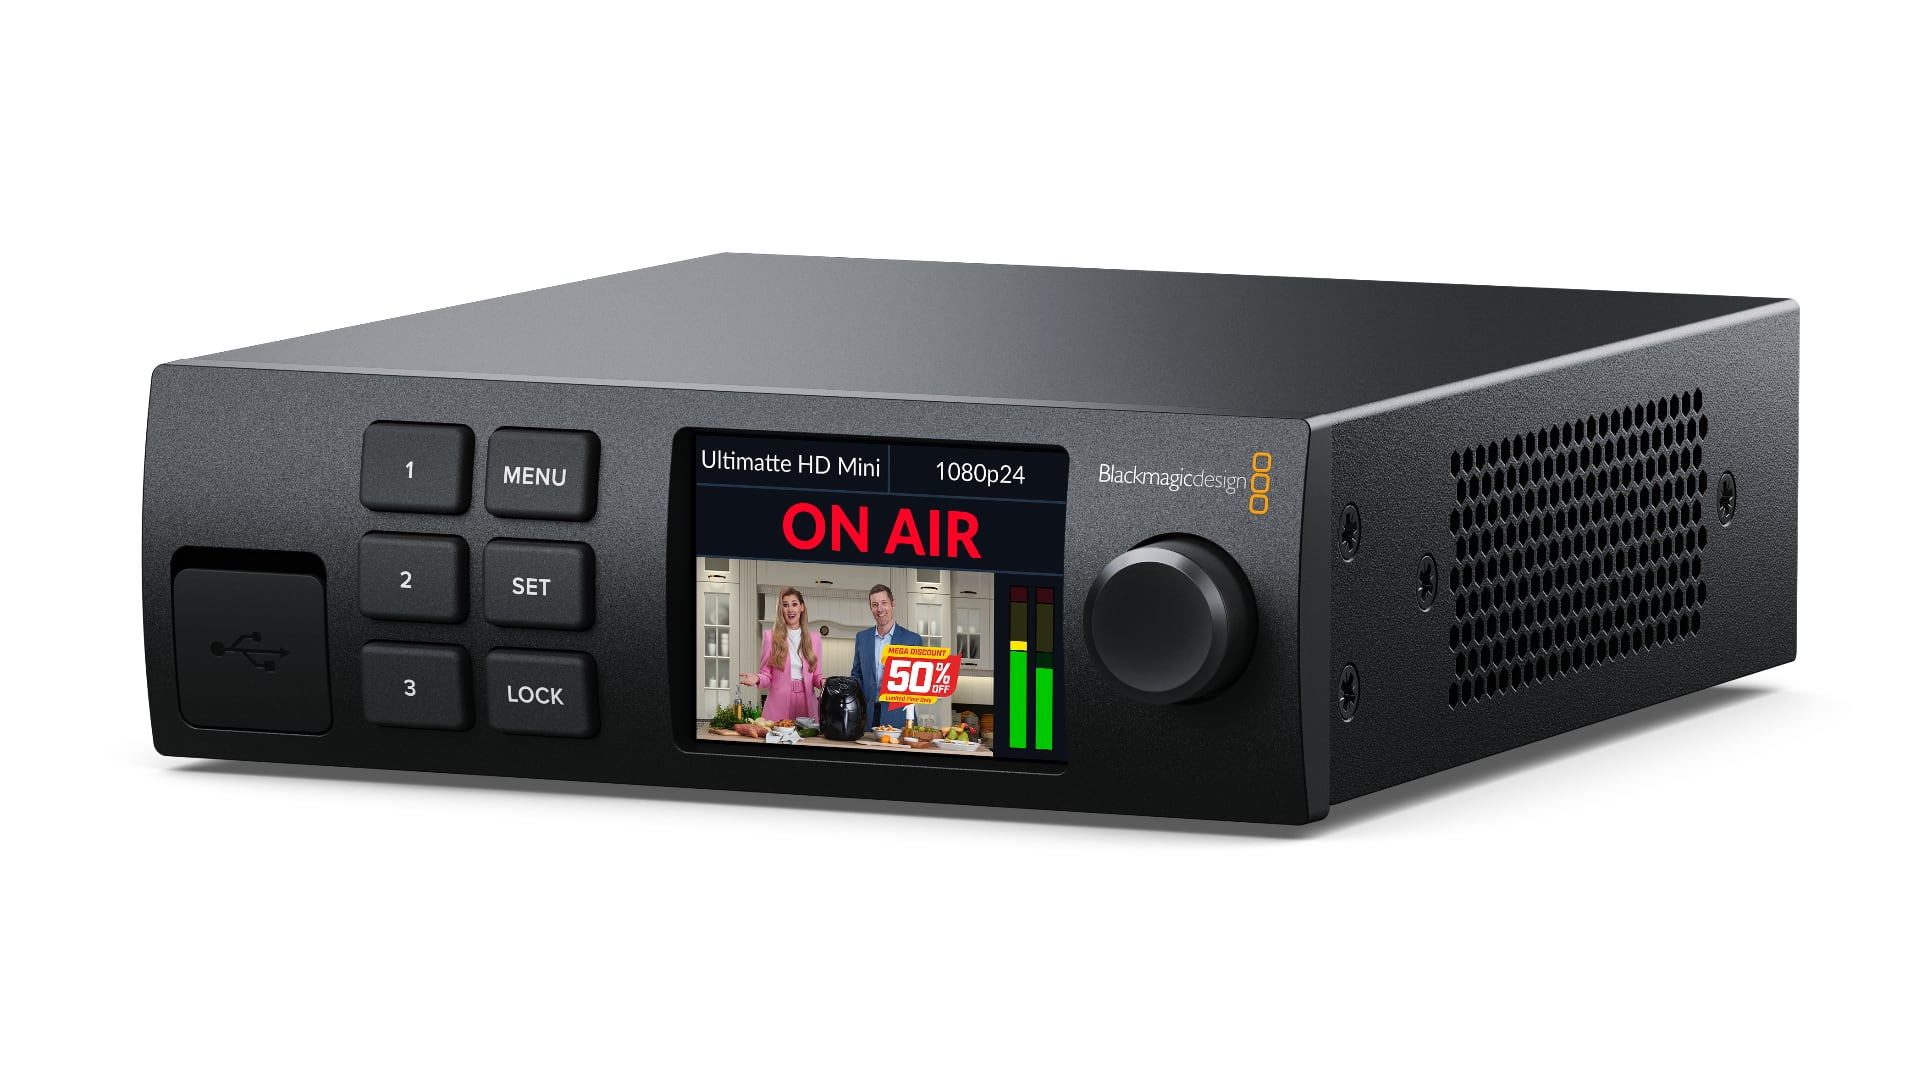 The new Ultimatte 12 HD Mini offers broadcast quality keying at a sub $500 price point